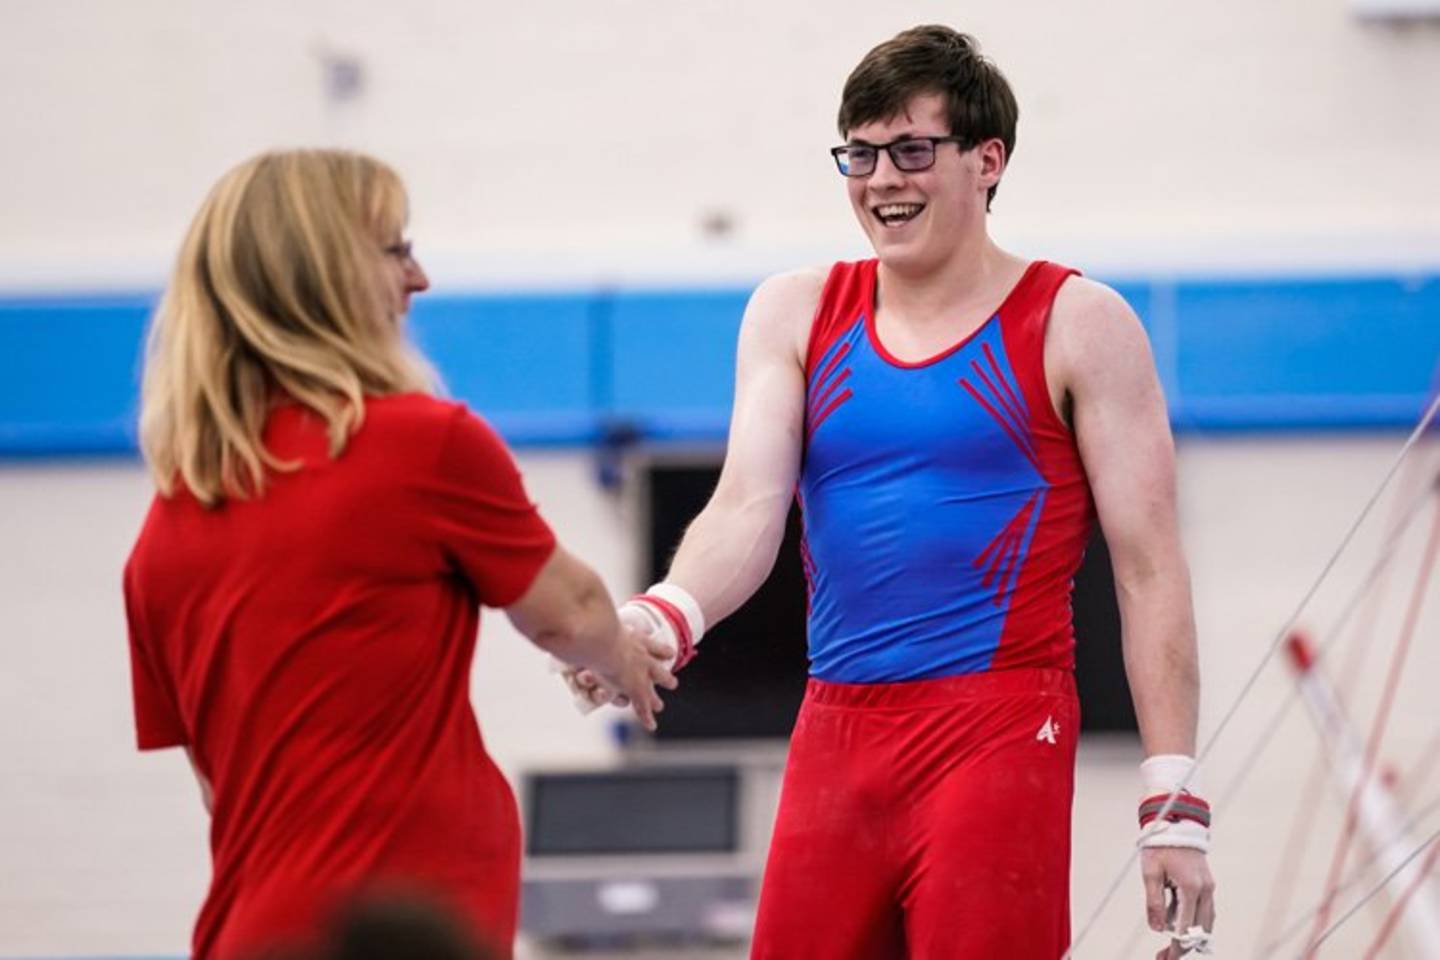 Male disabled gymnast smiling and giving his coach a high five